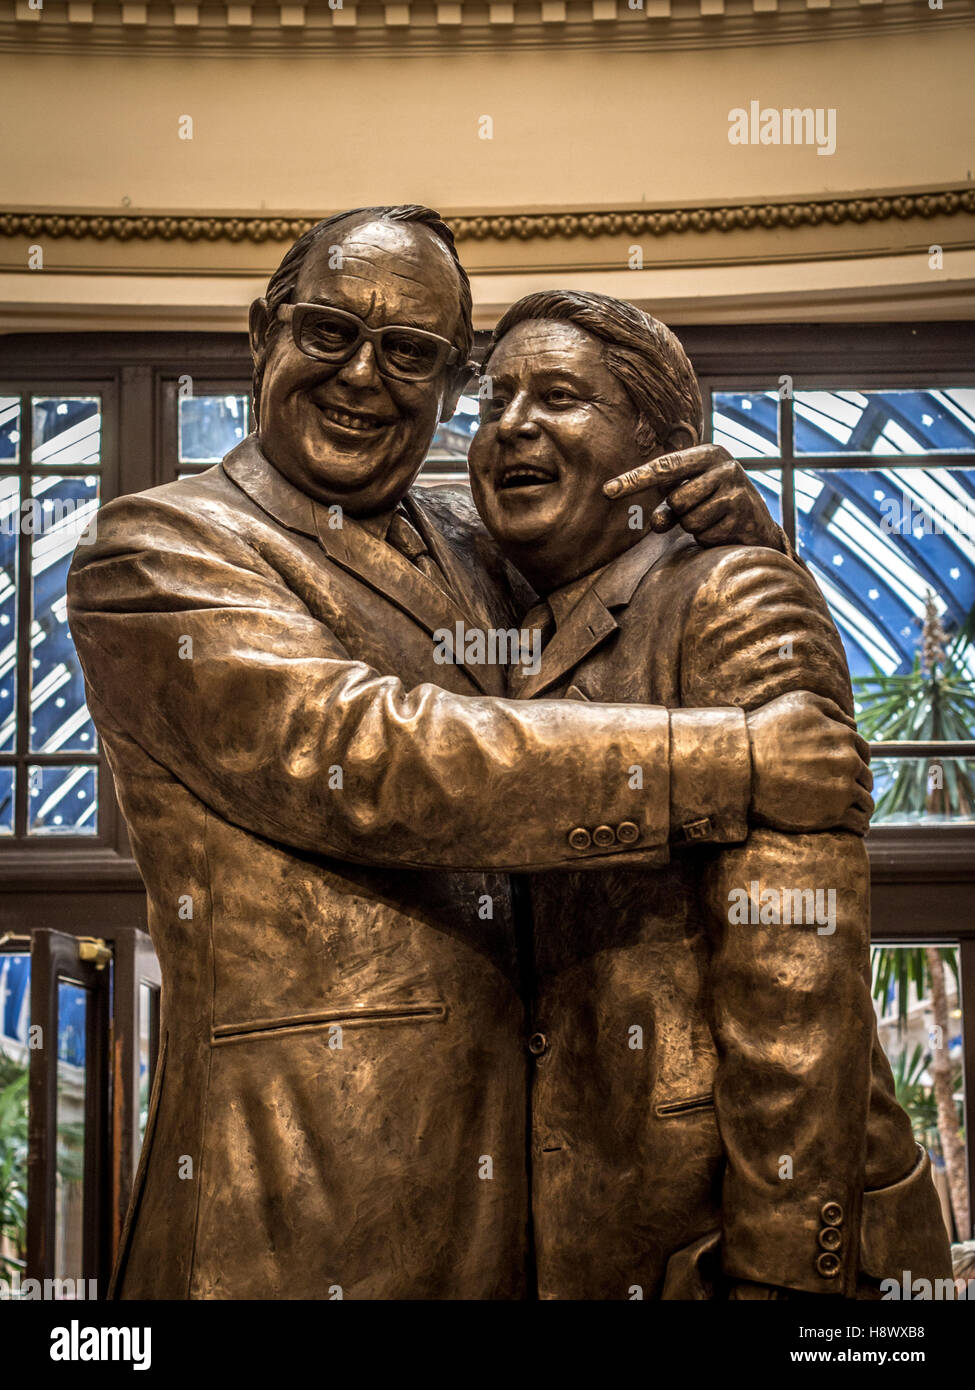 Statue of Eric Morecambe and Ernie Wise by Graham Ibbeson in the domed entrance of Blackpool’s Winter Gardens, Lancashire, UK. Stock Photo